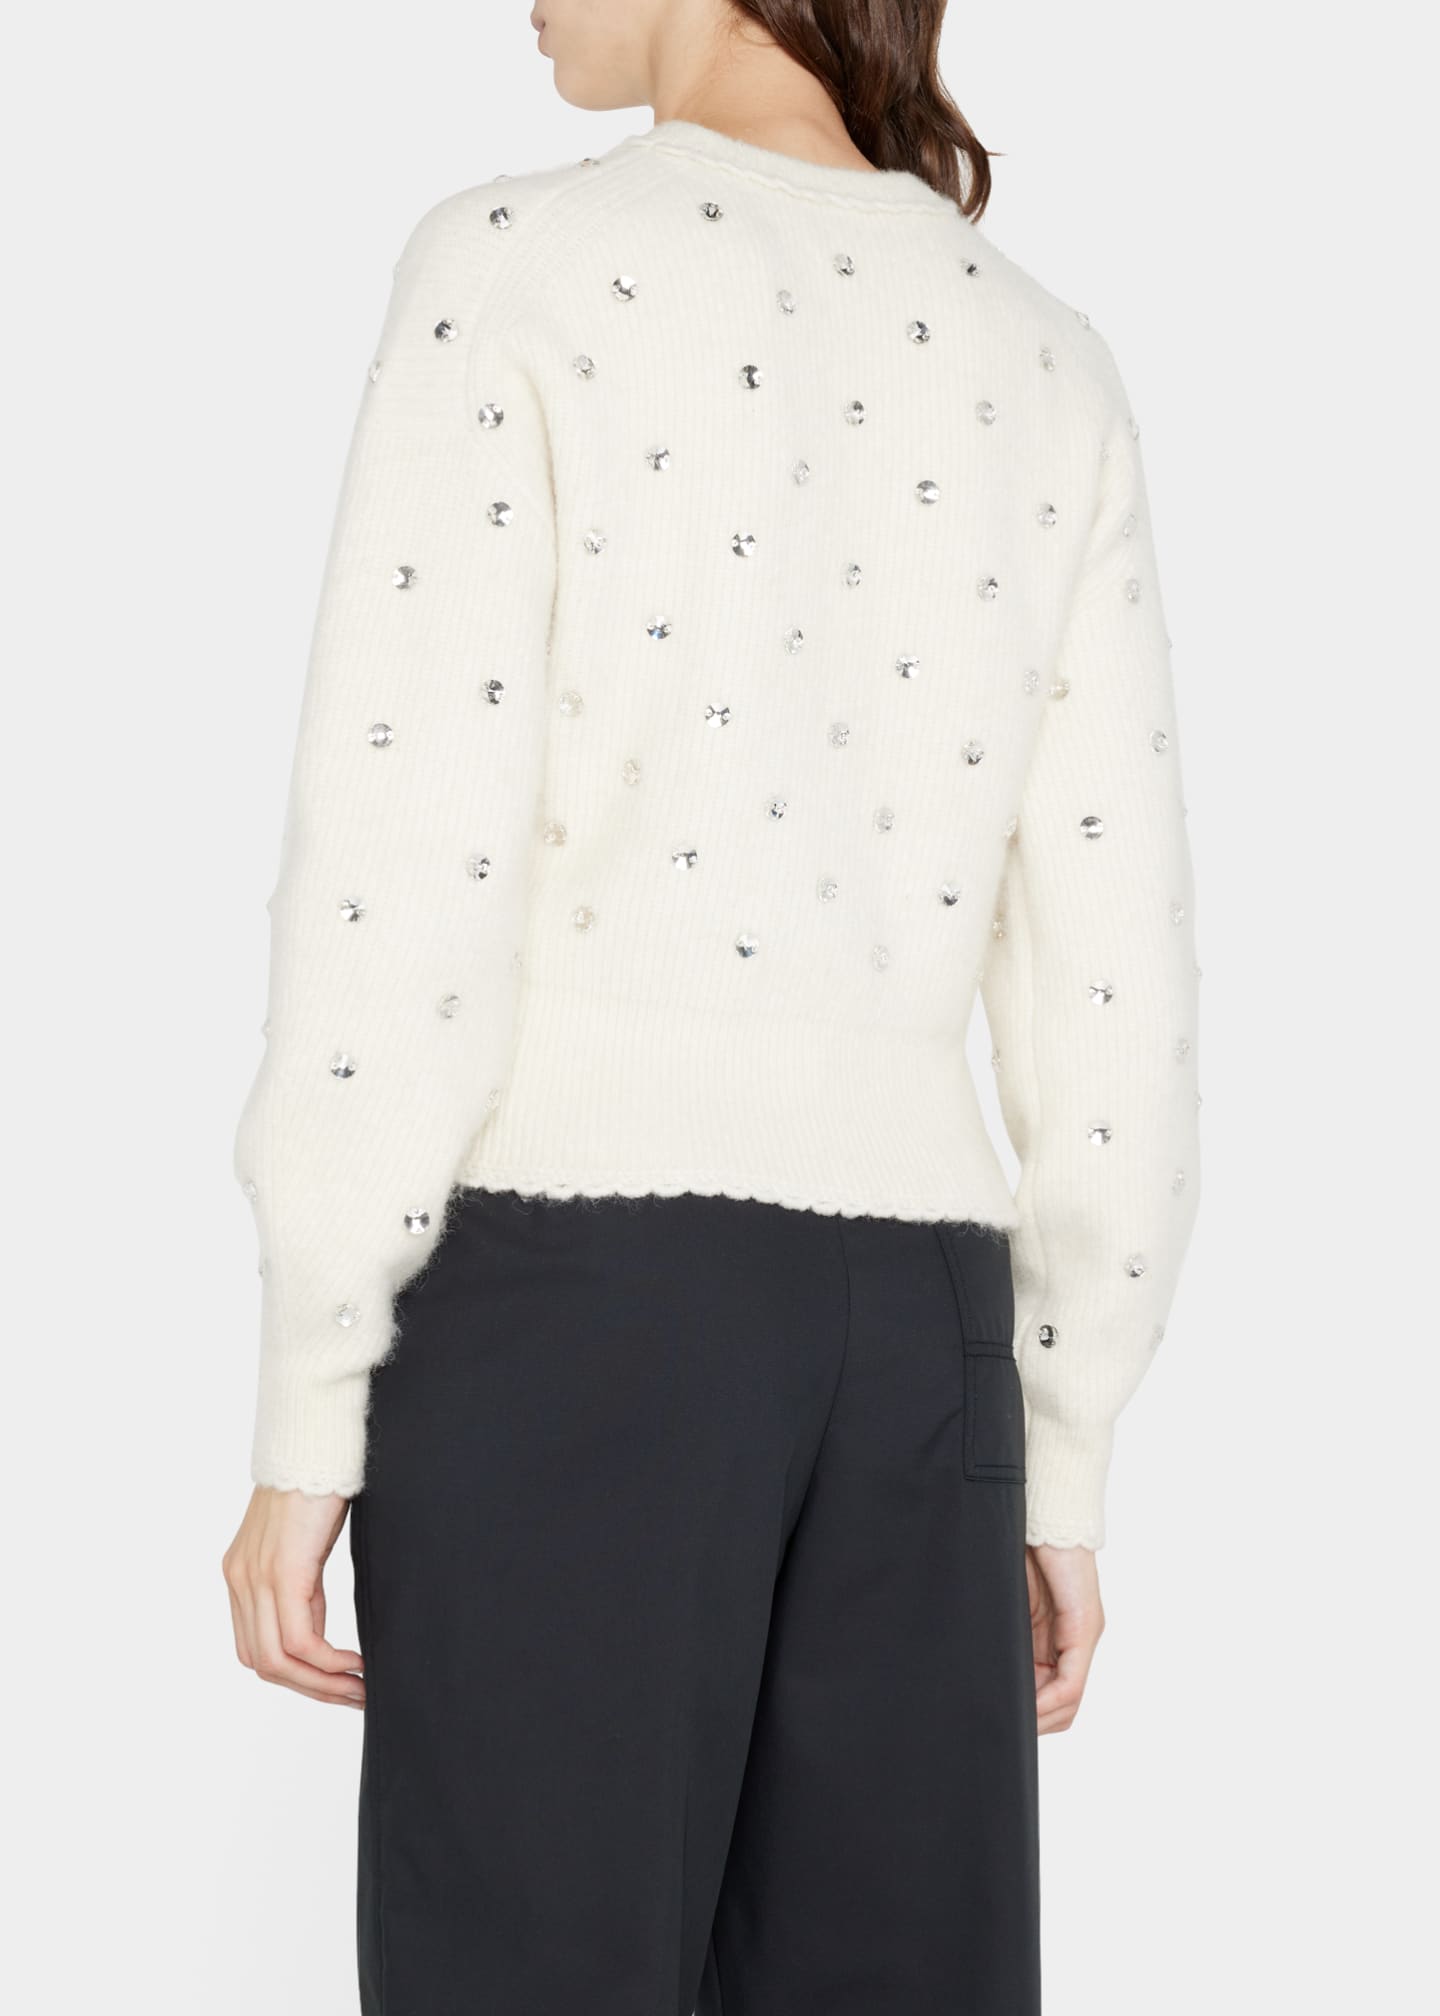 3.1 Phillip Lim Embellished Crewneck Sweater with Scalloped Trim ...